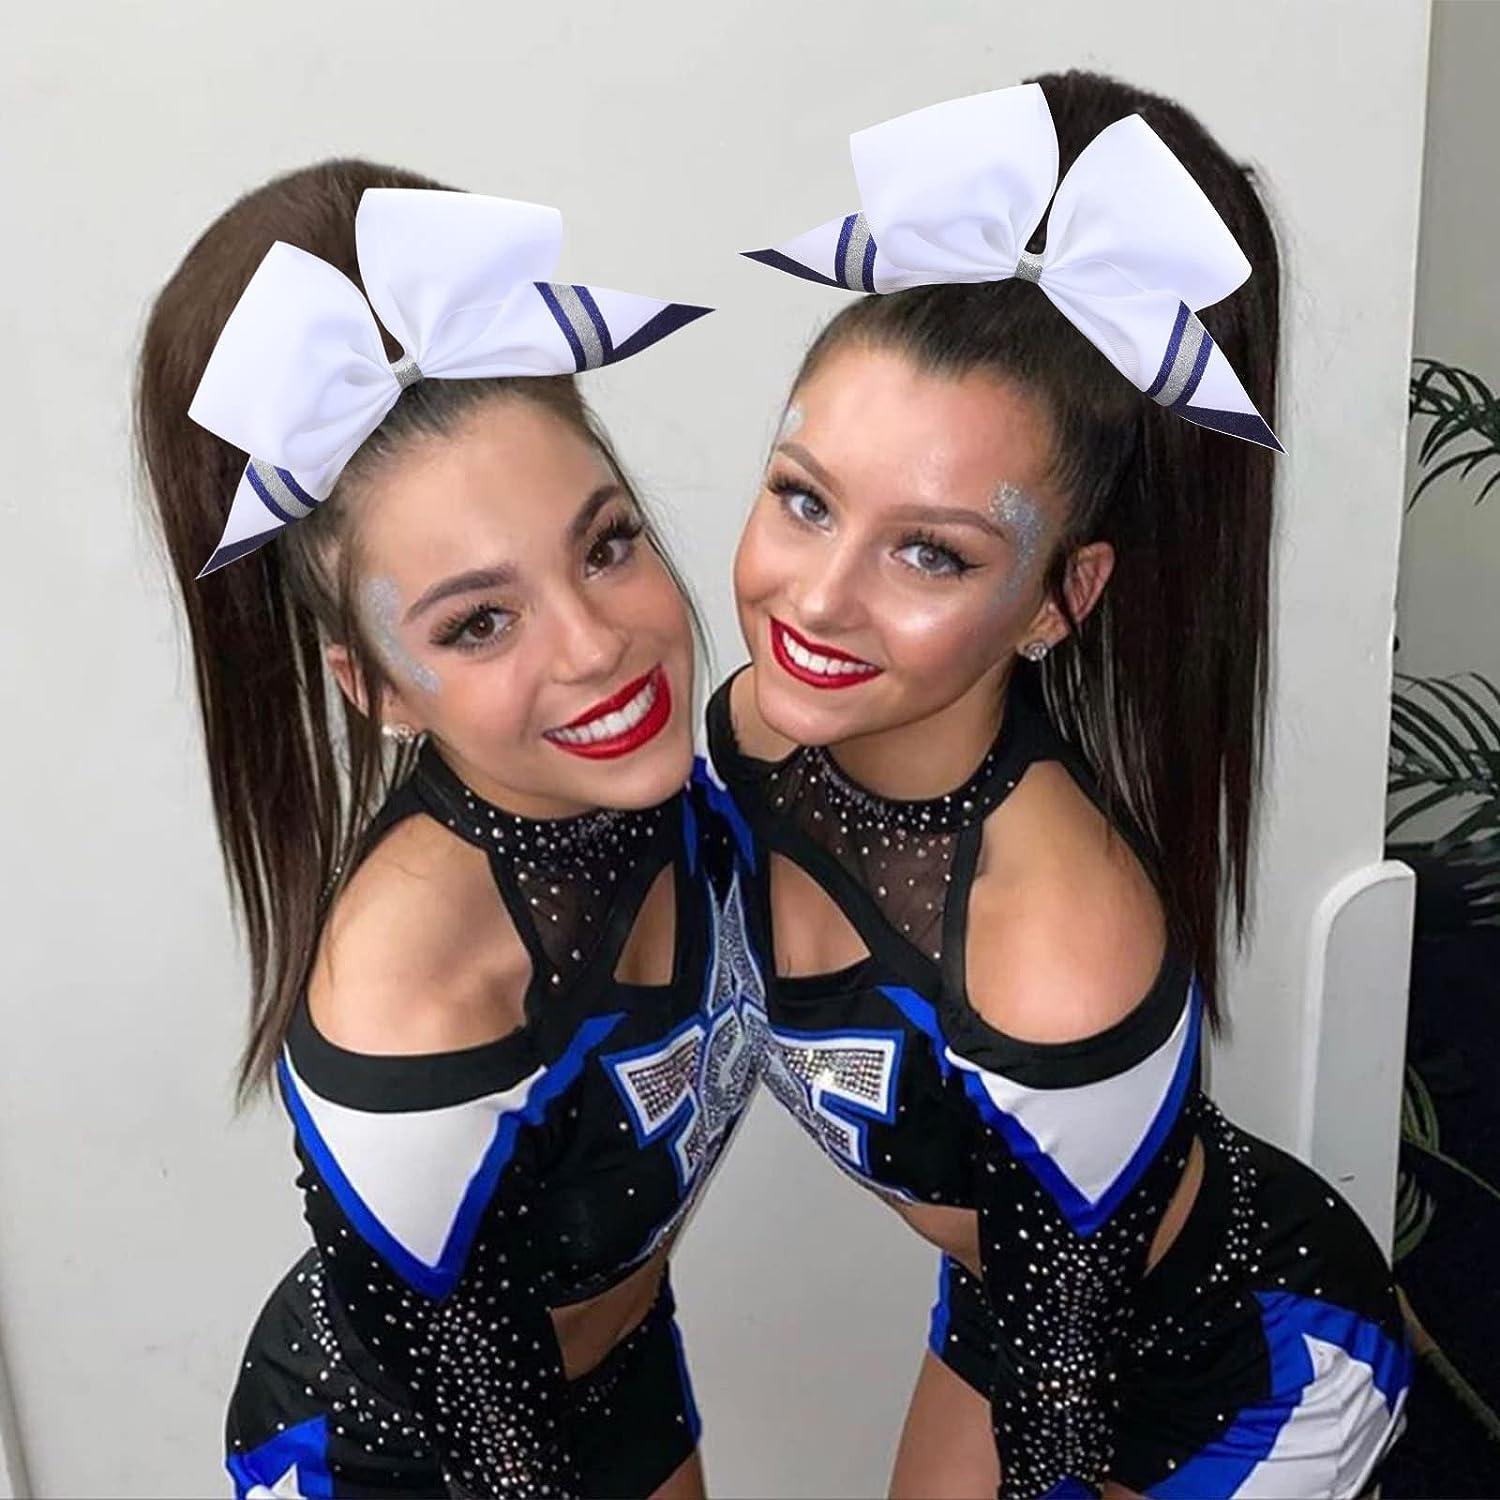 Star Line Sharp #10 Smooth 3/8 Twirling Baton, High-quality cheerleading  uniforms, cheer shoes, cheer bows, cheer accessories, and more